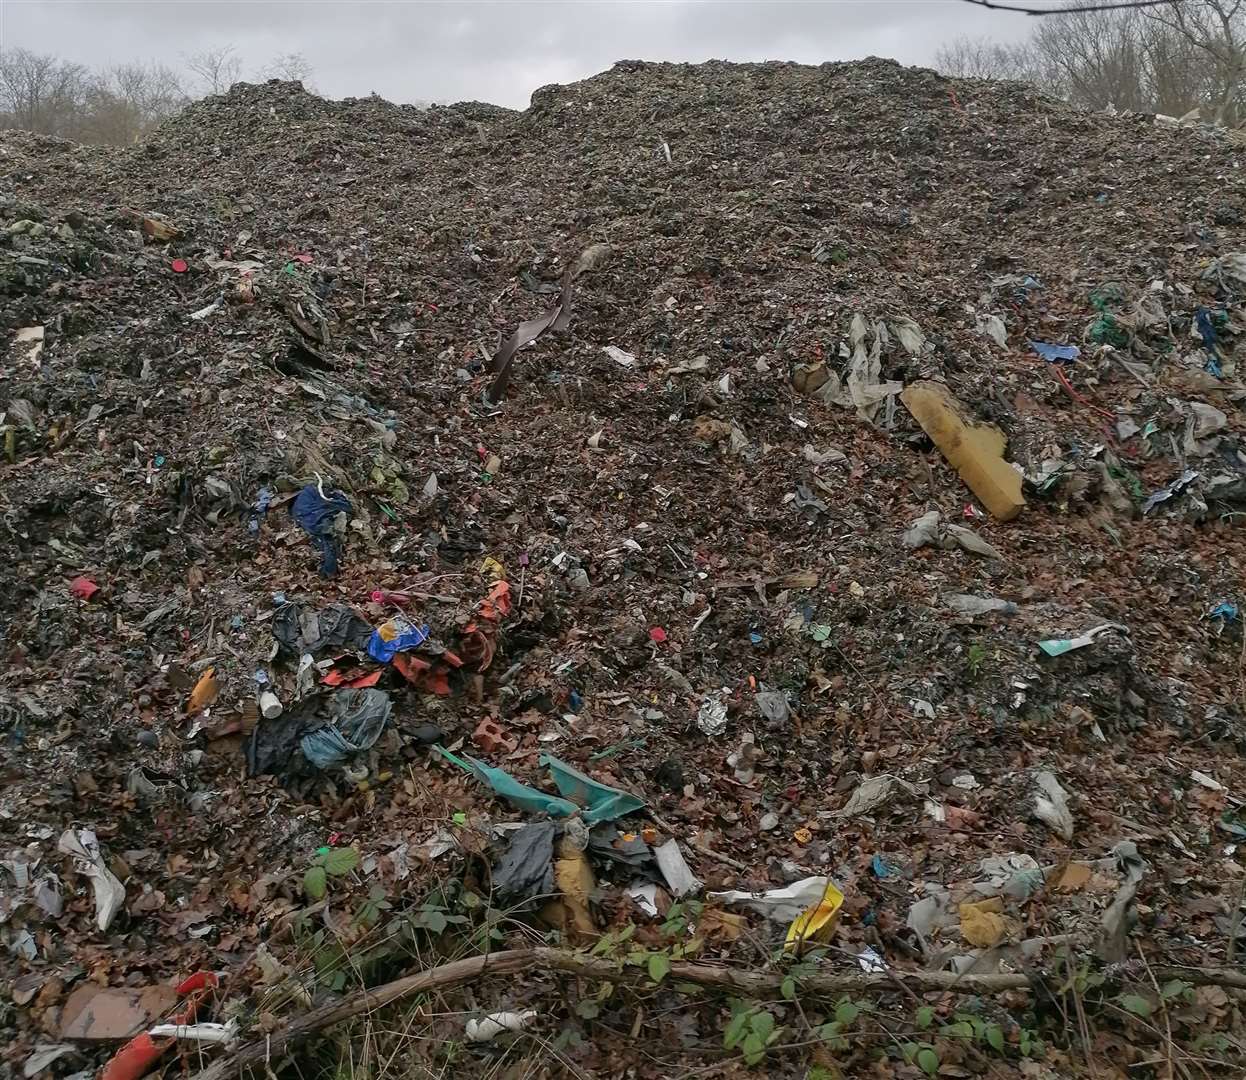 A resident who shared pictures with KentOnline said the waste covers an area of four acres in Hoad's Wood